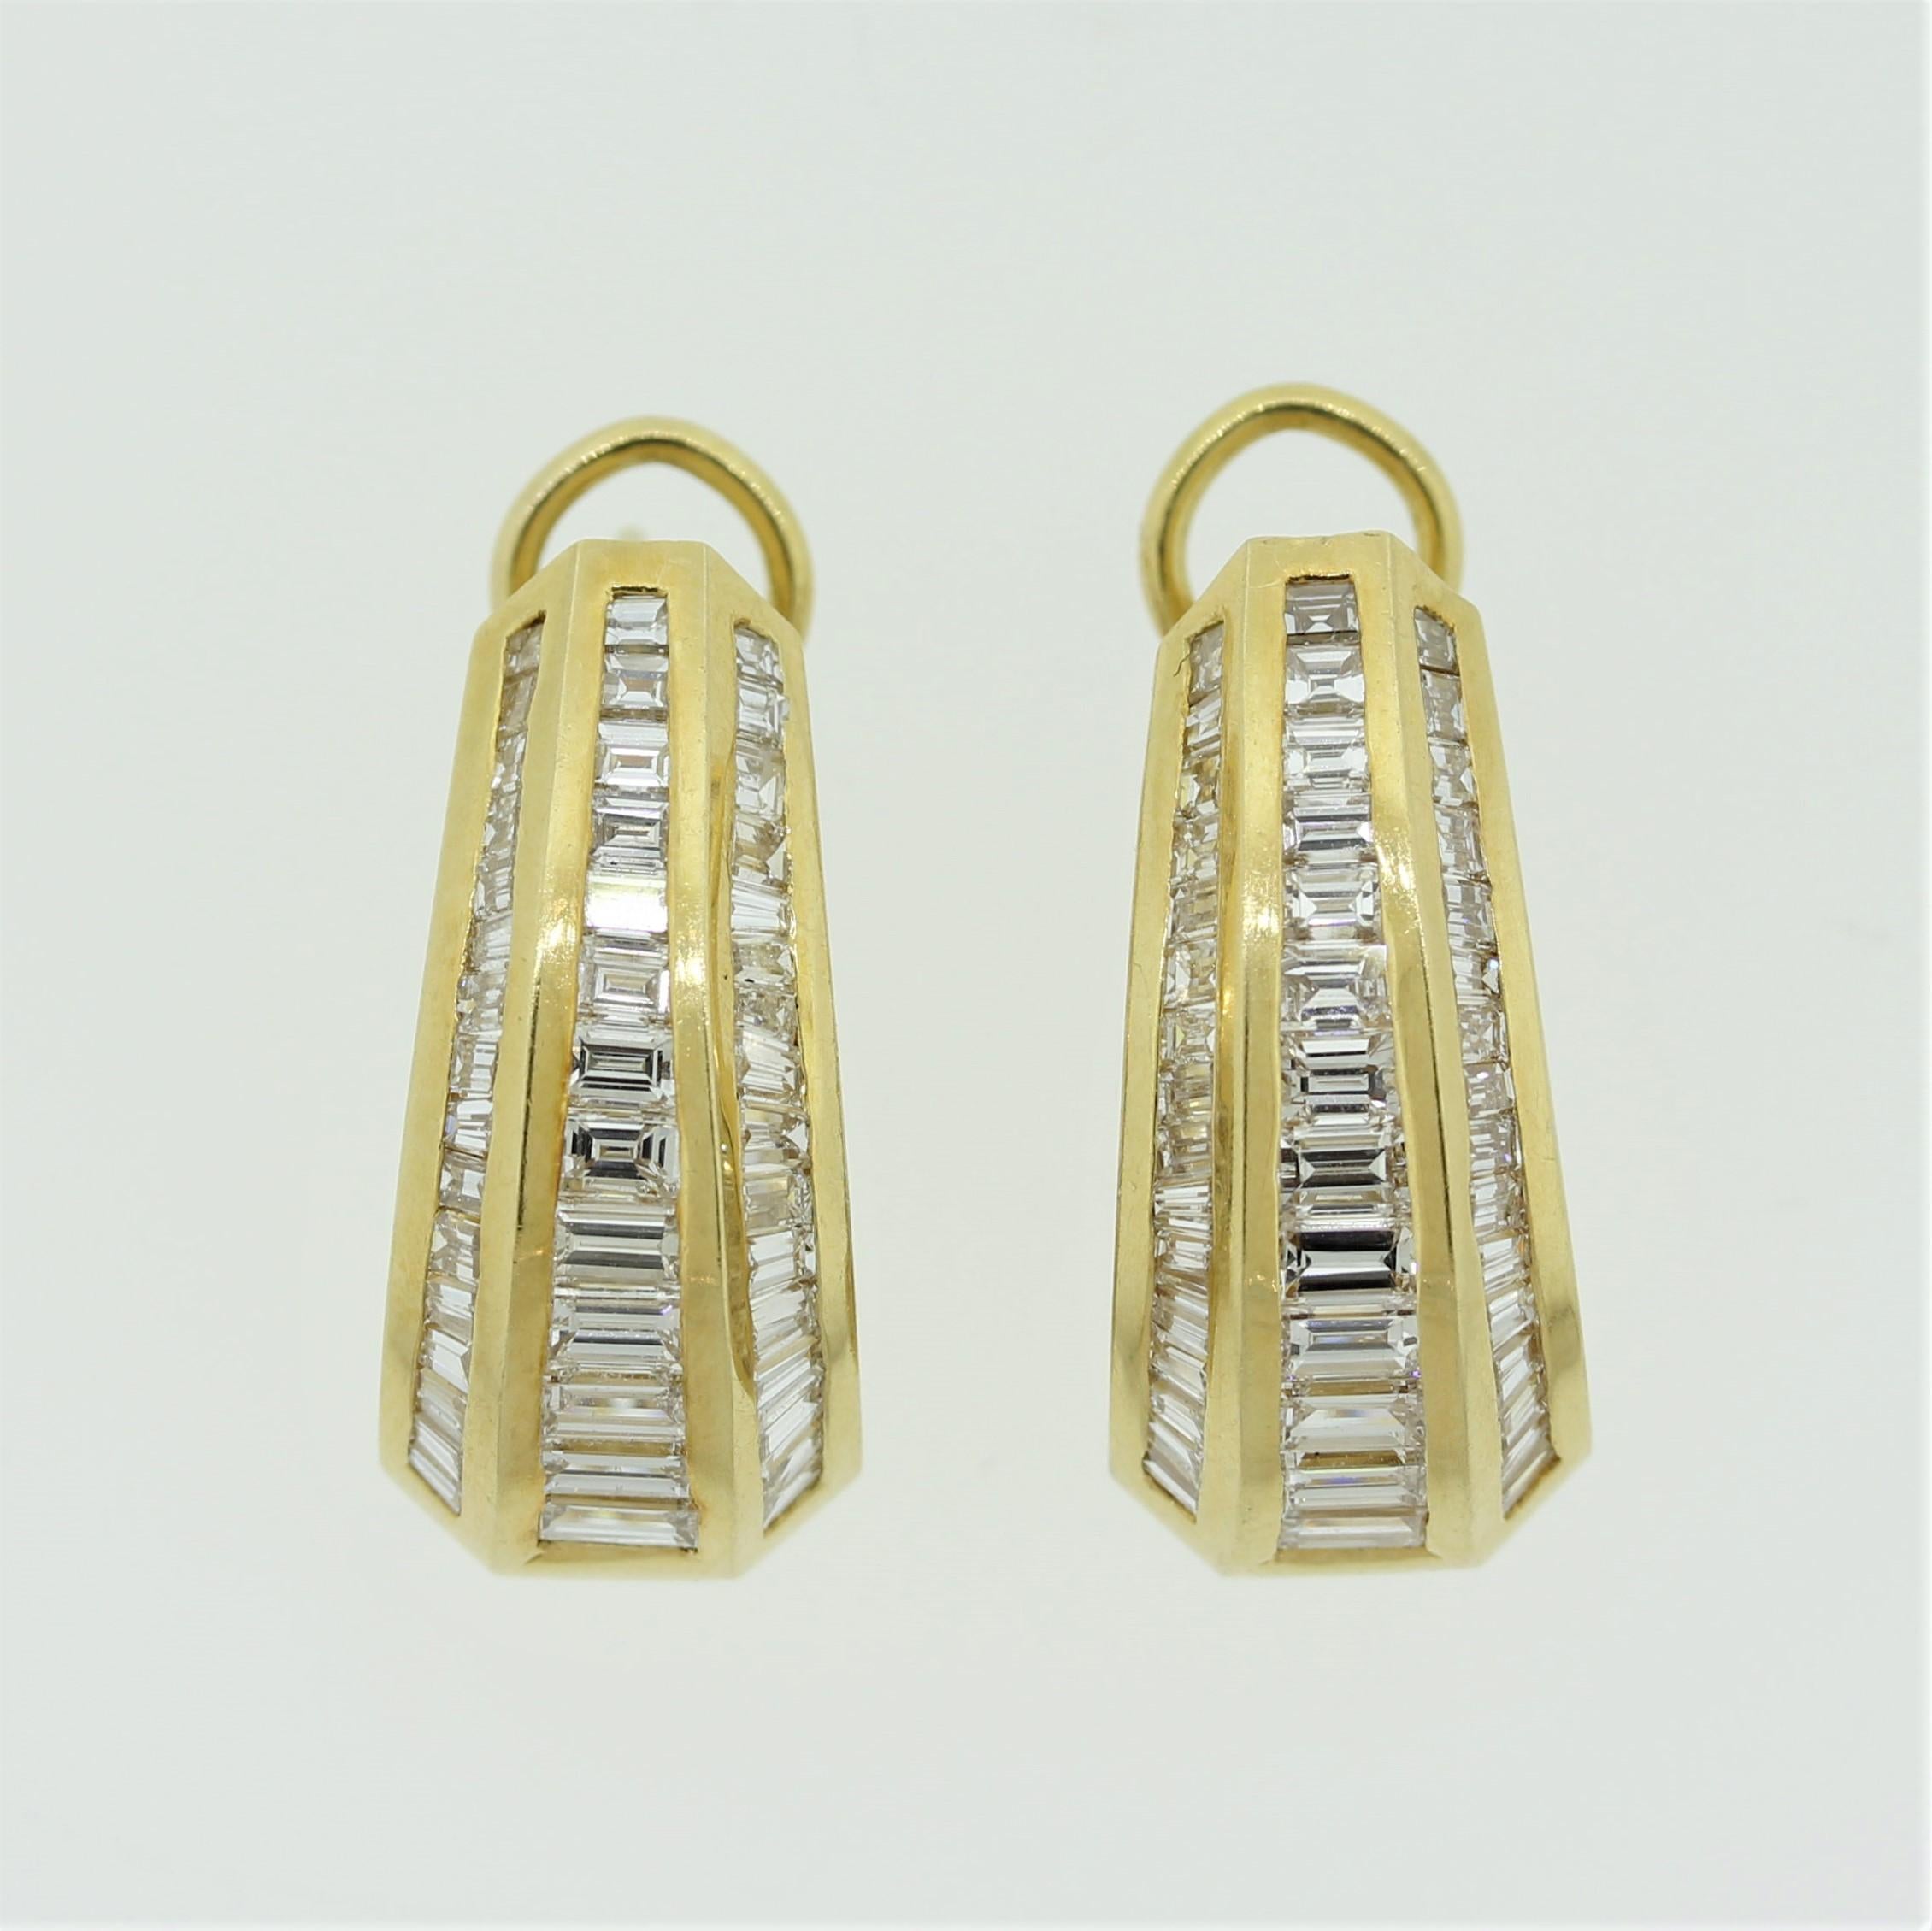 A lovely piece from the 70’s featuring 5 carats of fine bright white baguette-cut diamonds. They are channel-set in rows of 3 running down each earring. Made in 18k yellow gold and ready to be worn.

Length: 1 inch